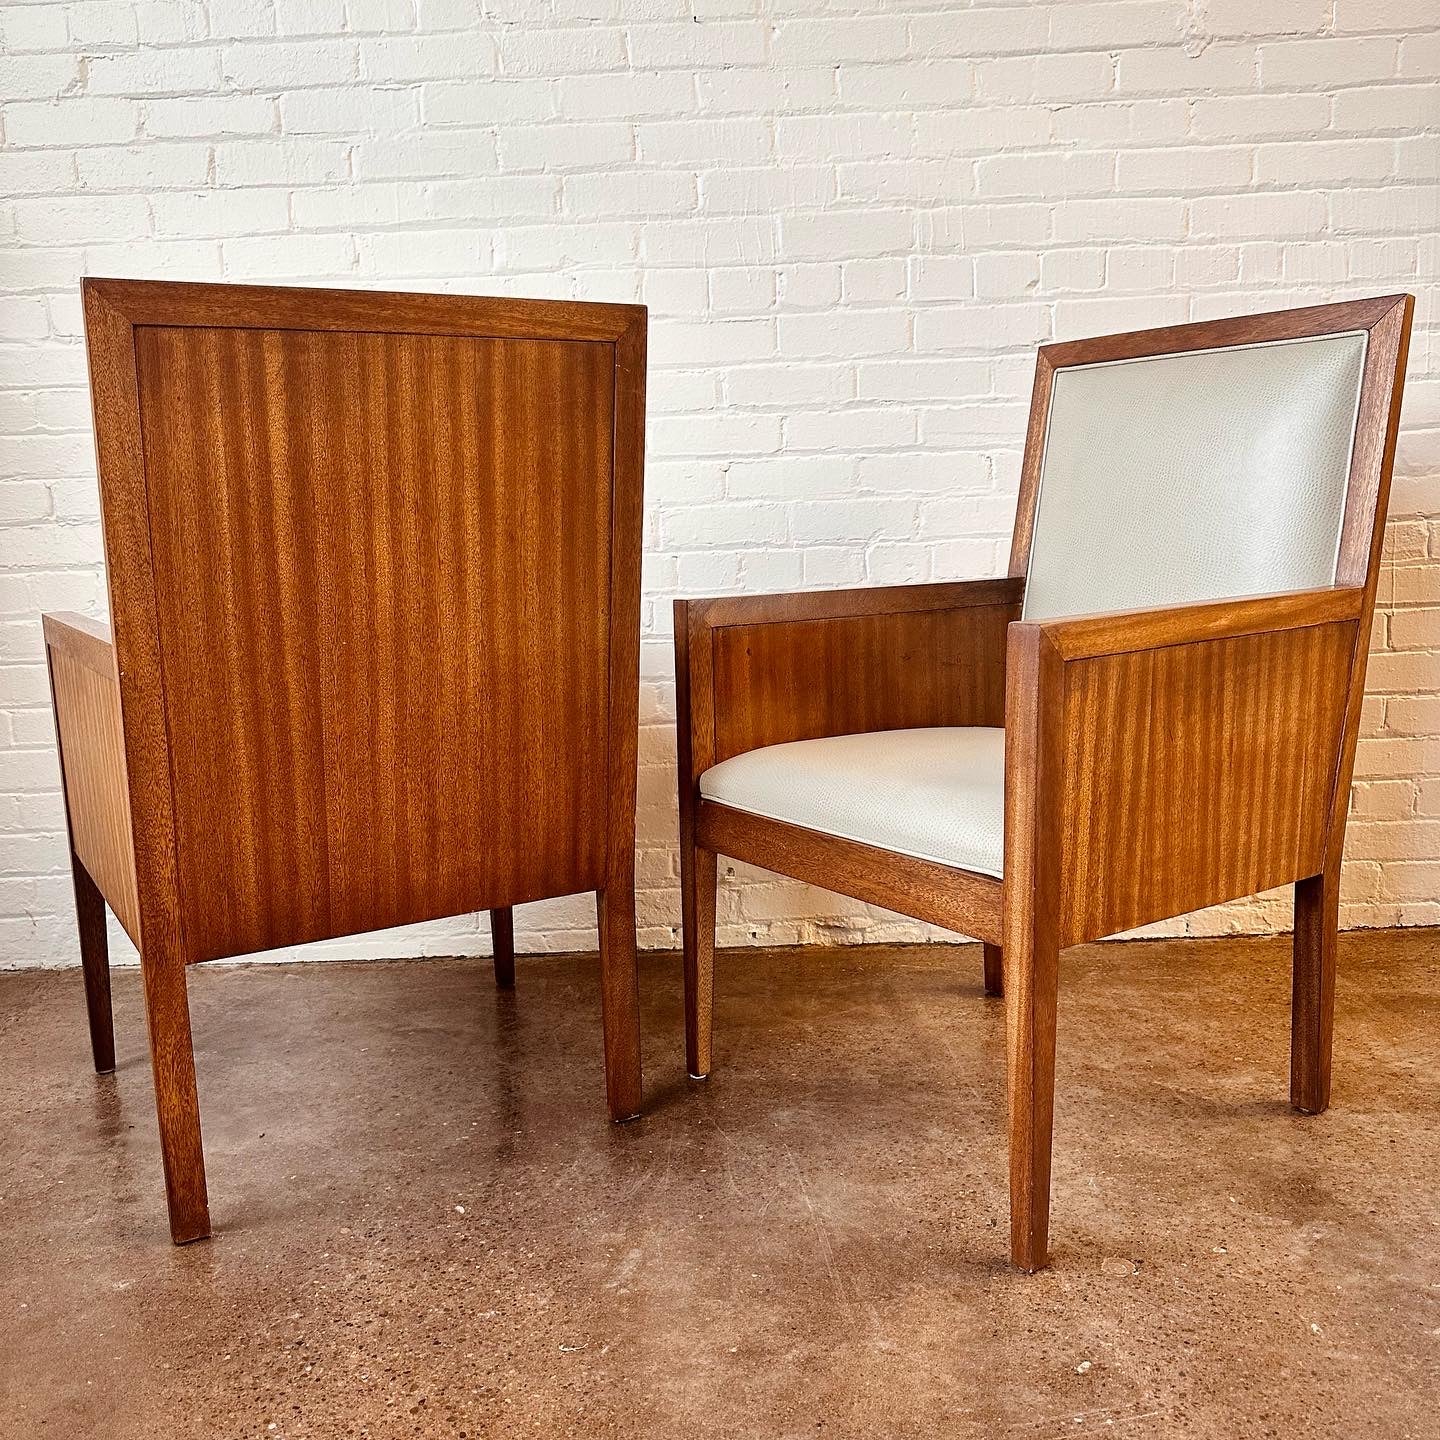 PAIR OF RIBBON MAHOGANY WOOD CHAIRS W/ FAUX OSTRICH SKIN